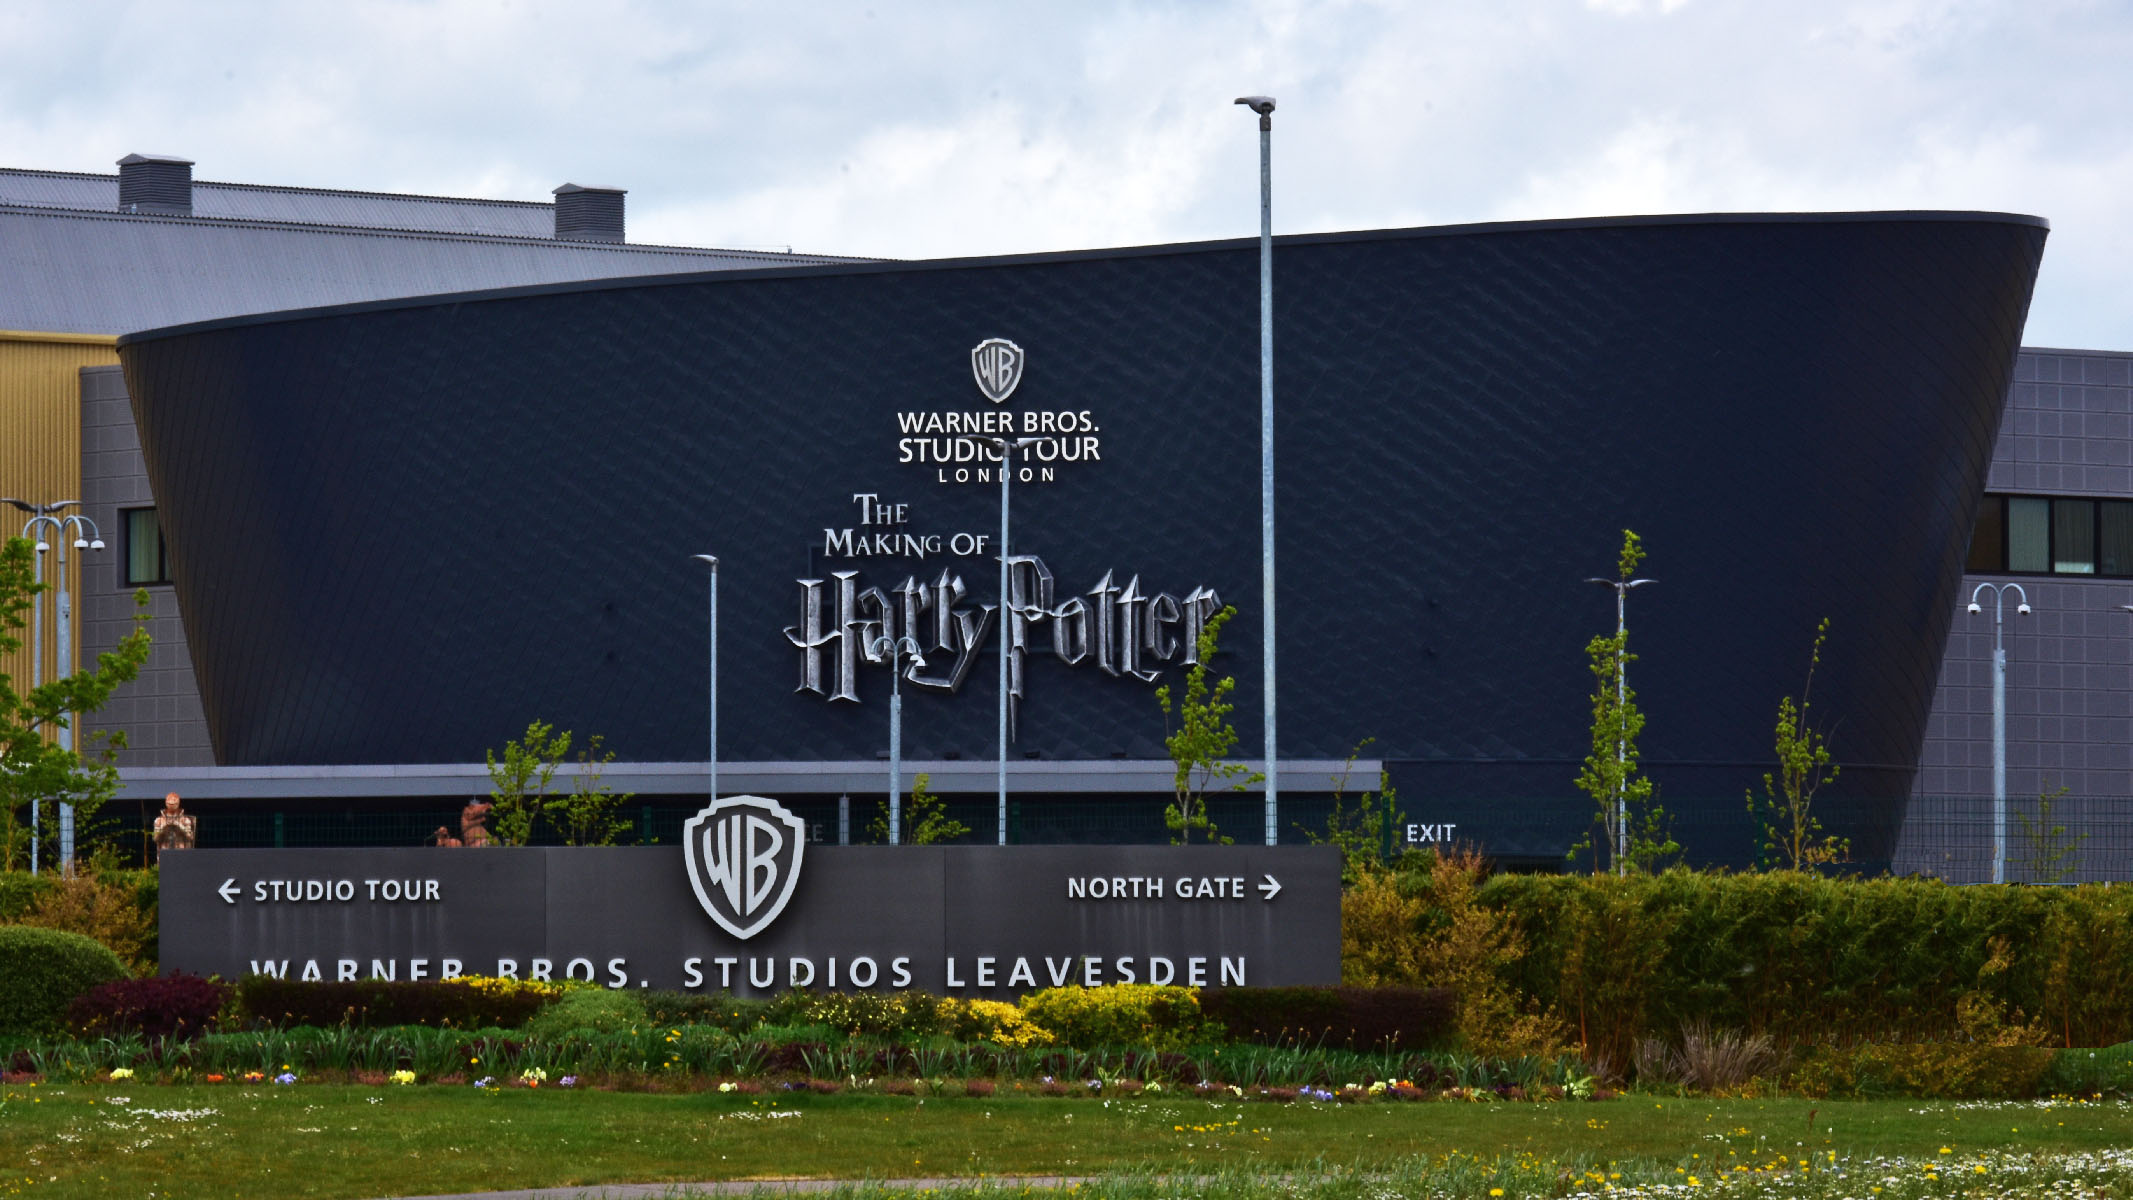 On the same day as the NEW Harry Potter Tour Ticket office was being set to open.